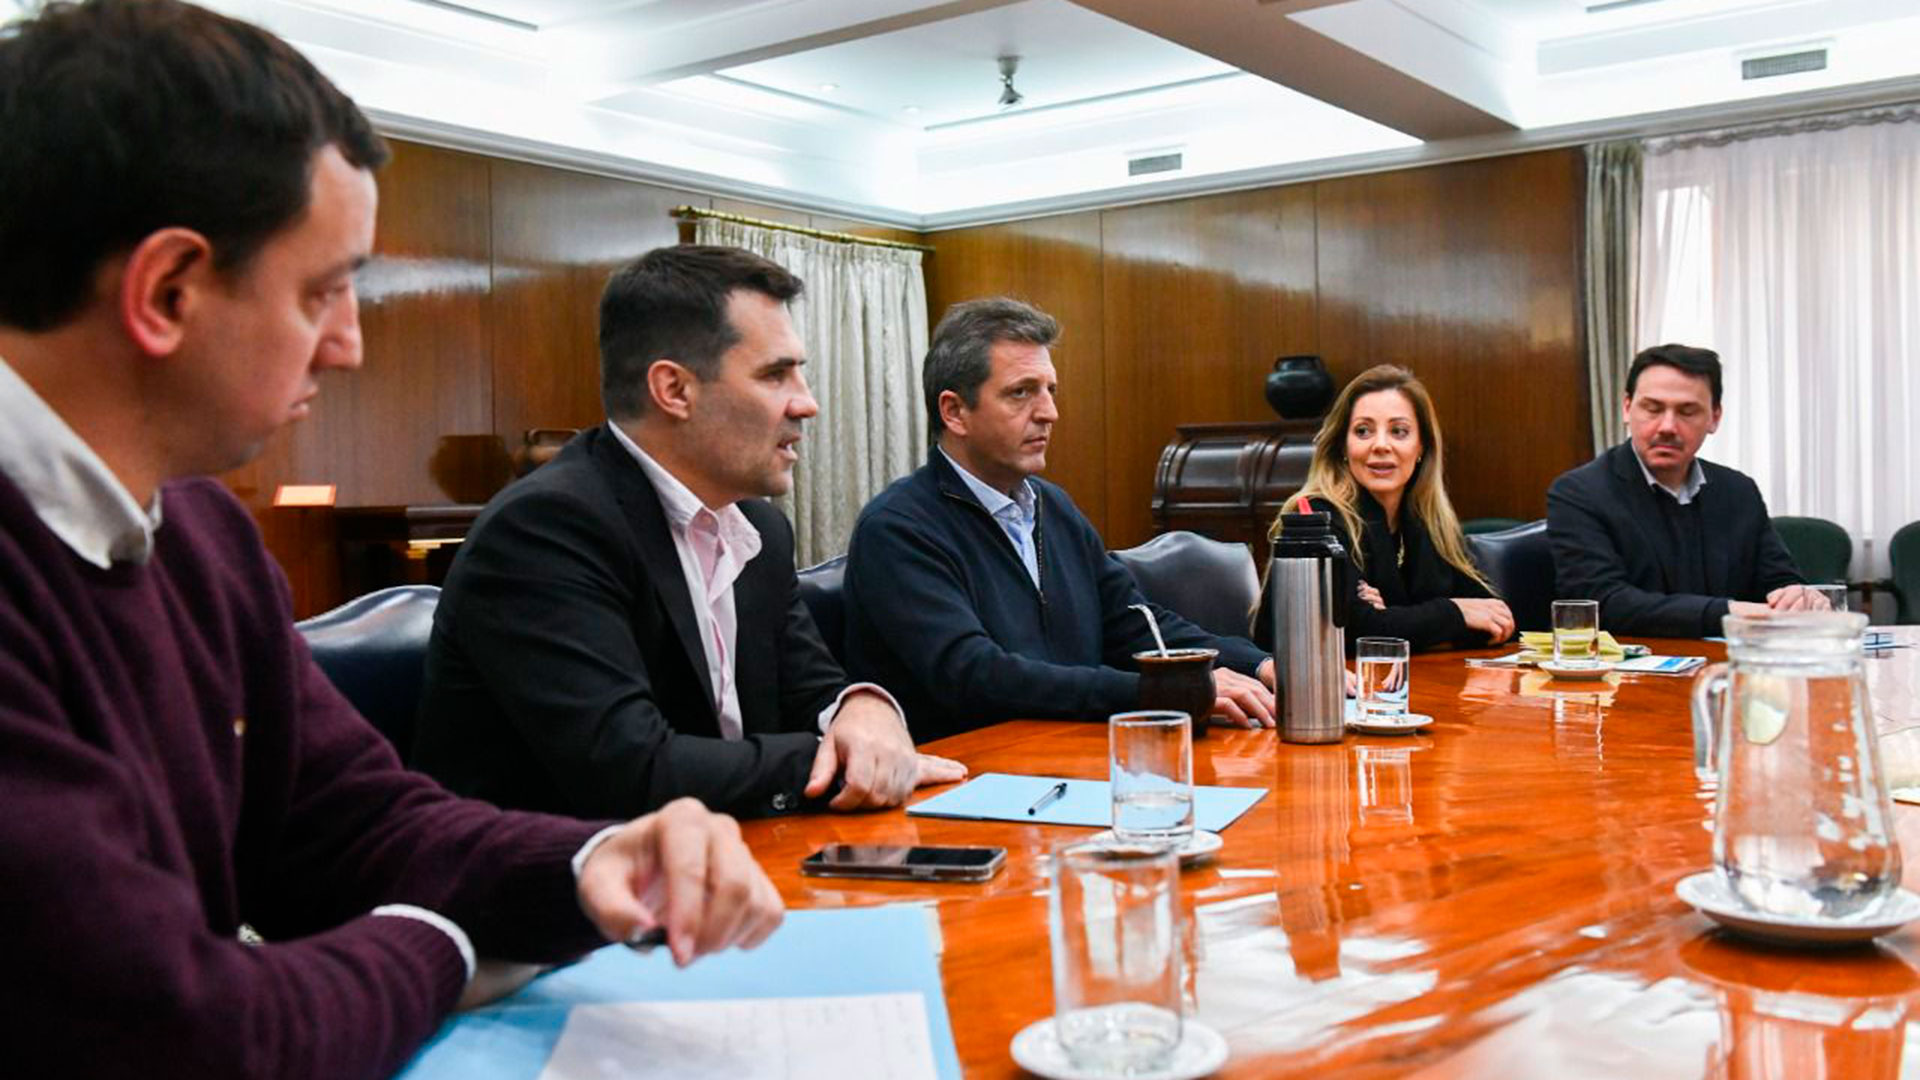 The Secretary of Energy, Flavia Royón, in a meeting with the Minister of Economy and Energy officials 